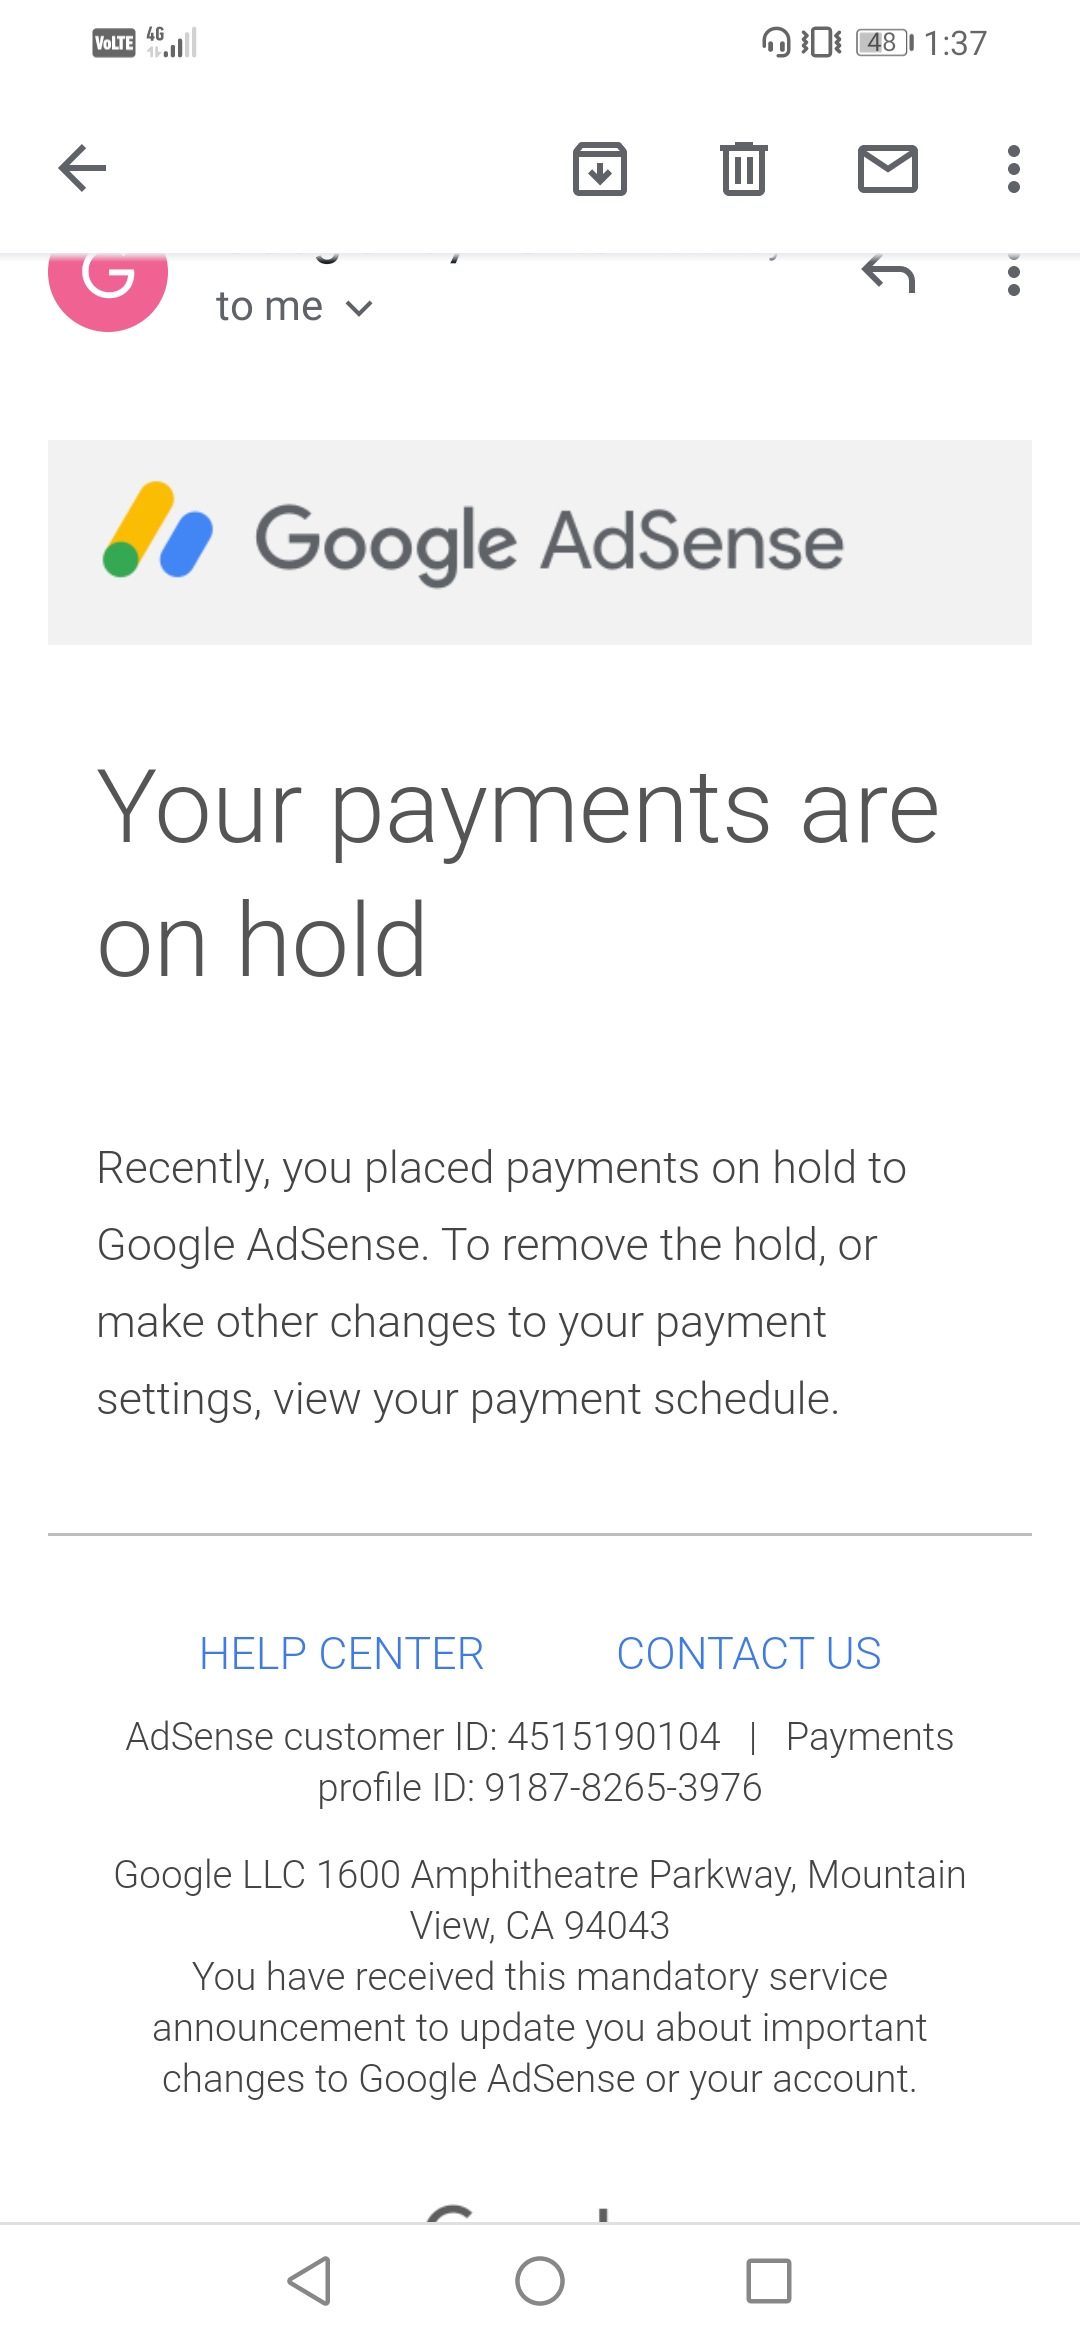 Why are my payments on hold?